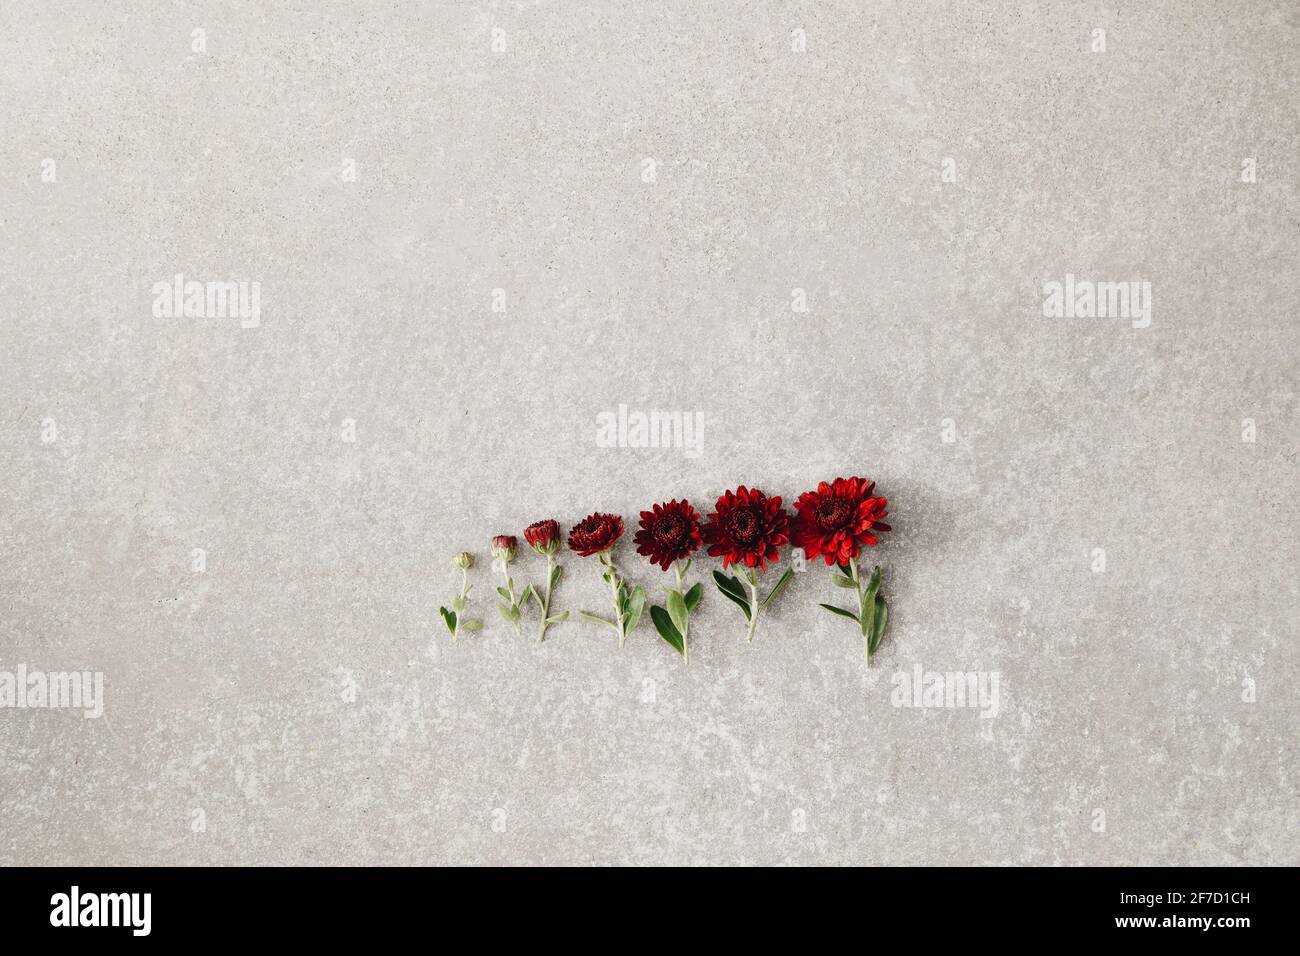 Creative flower arrangement on gray concrete background, life concept, stages of growth, flat lay, copy space. Stock Photo